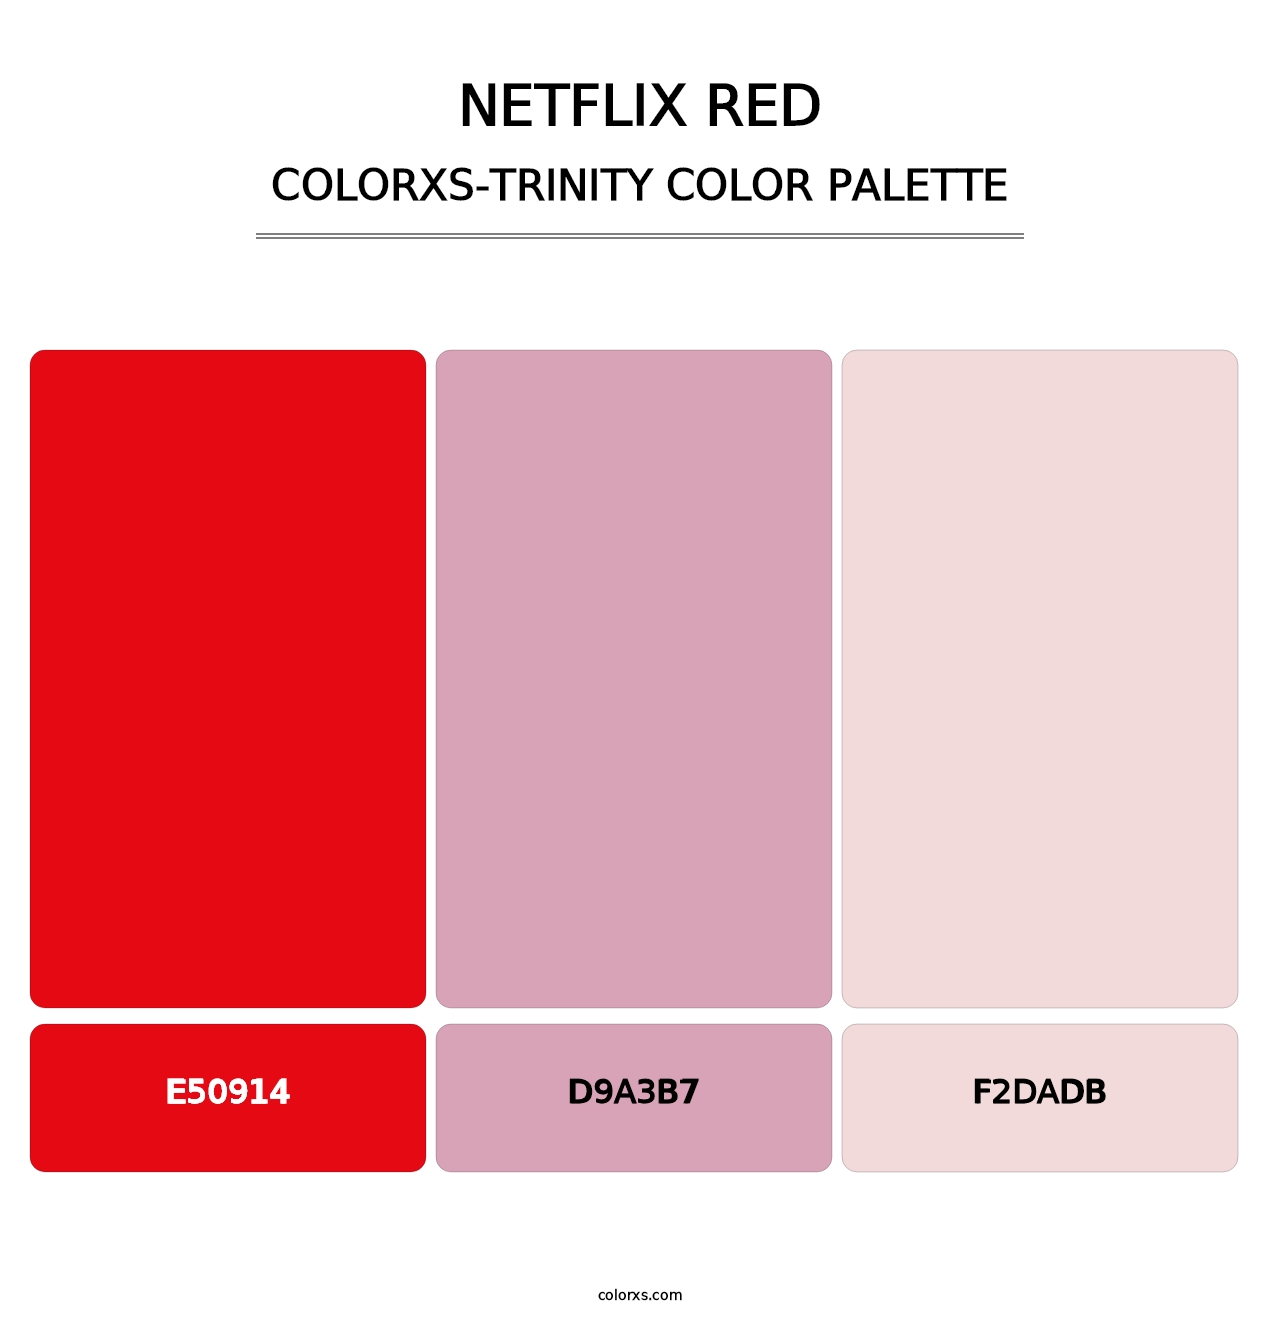 Netflix Red - Colorxs Trinity Palette